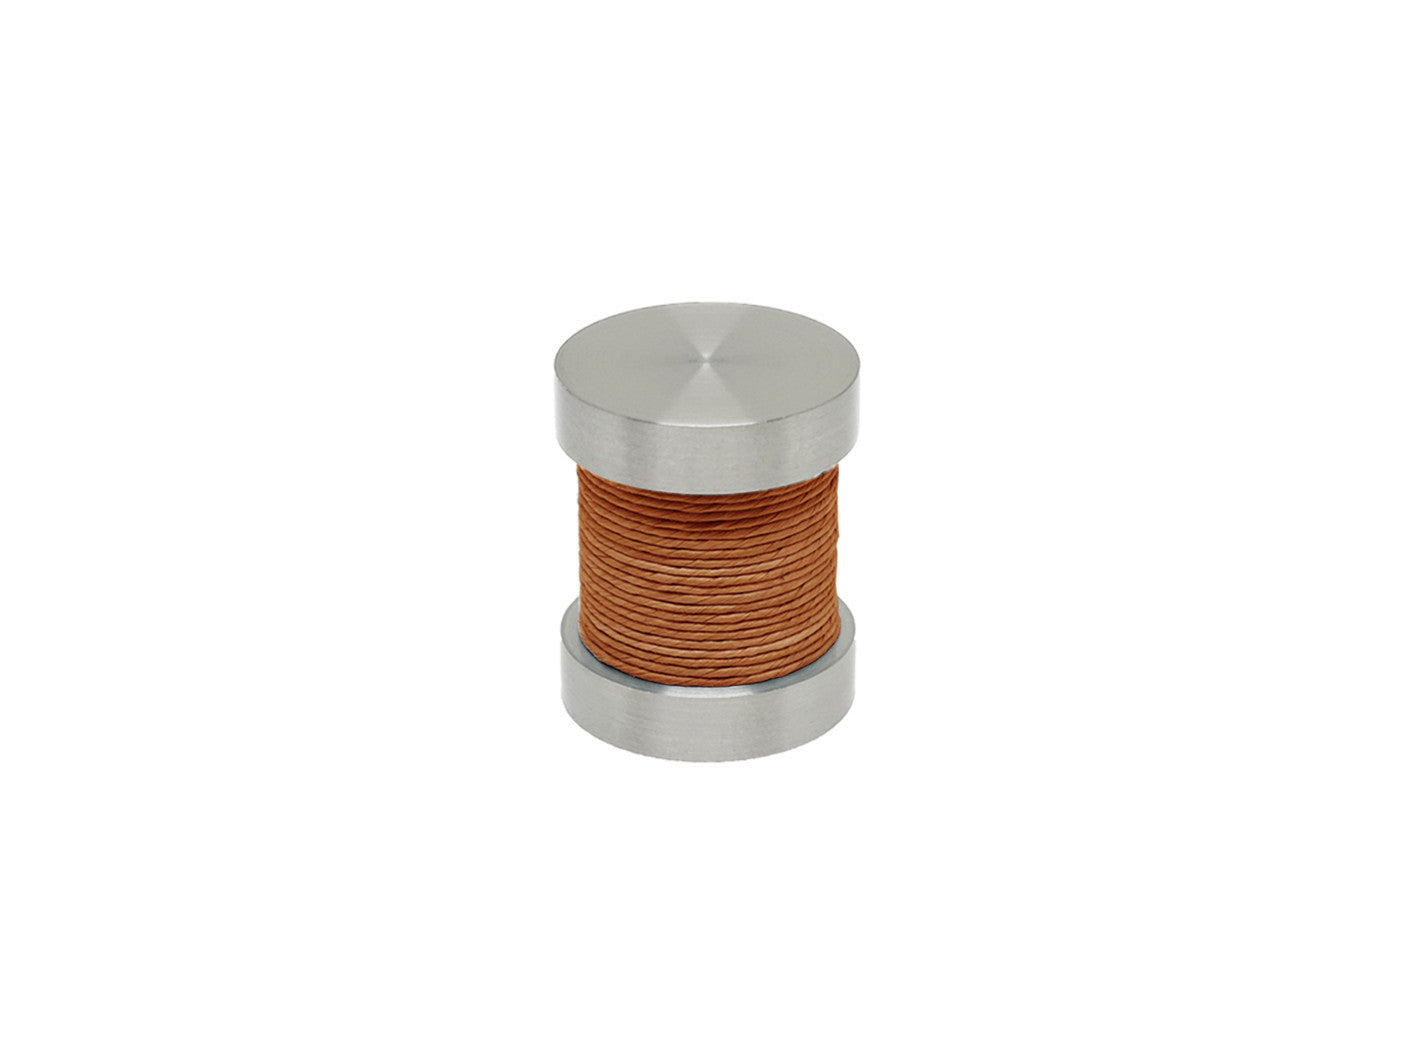 Fox orange coloured twine groove finial | Walcot House 30mm stainless steel collection